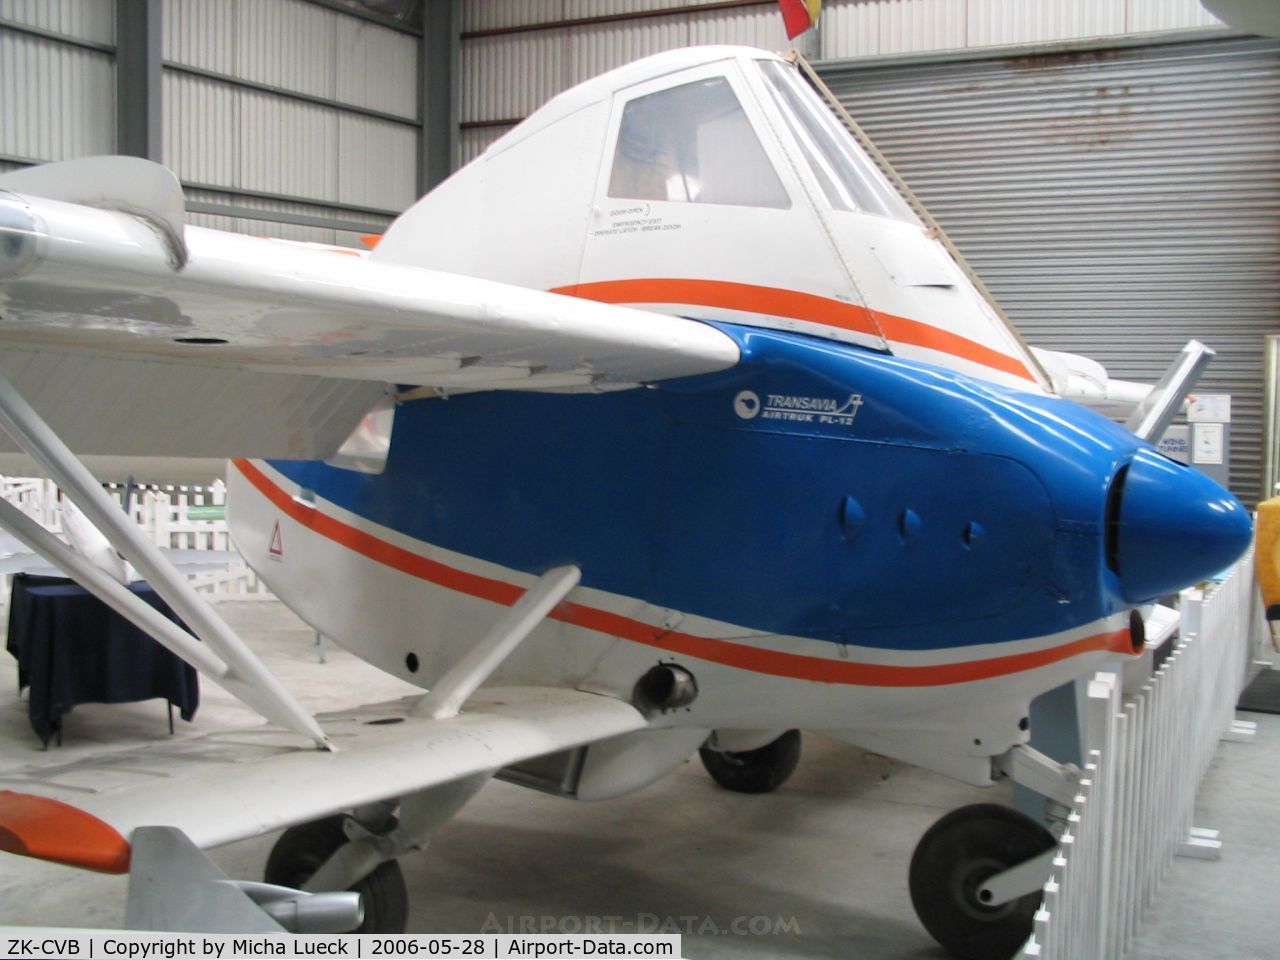 ZK-CVB, Transavia PL-12 Airtruk C/N 1, Transavia Airtruk PL-12 (cropduster), preserved at the Museum of Transport and Technology (MOTAT) in Auckland, New Zealand